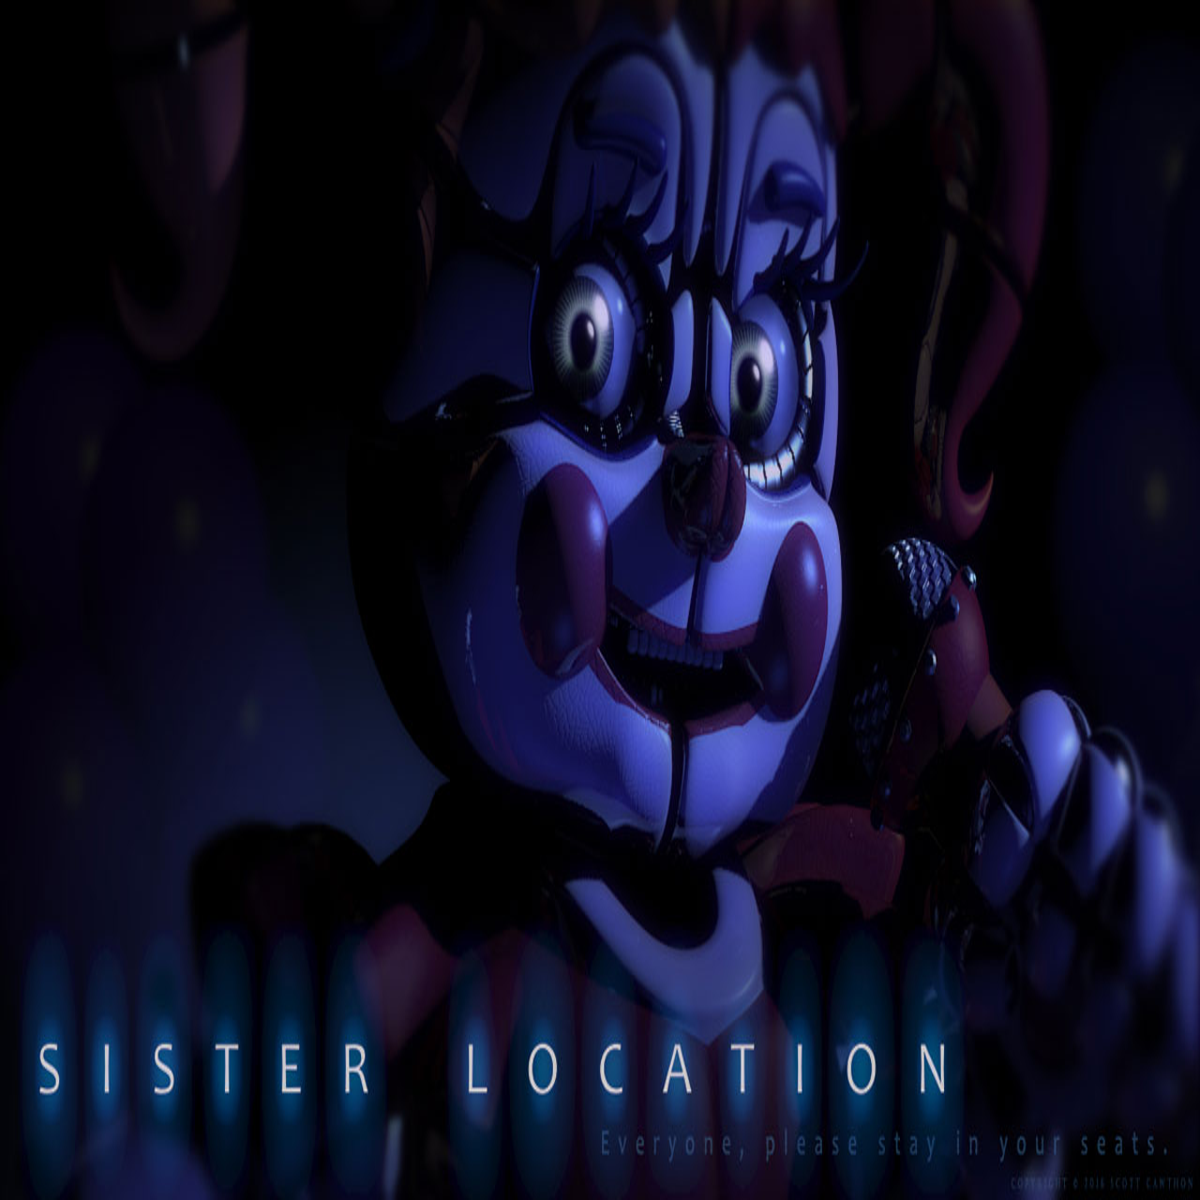 FNAF 3 NIGHT 7? SECRET IMAGES LEAKED  Five Nights at Freddy's 3 Night 7  Found? 